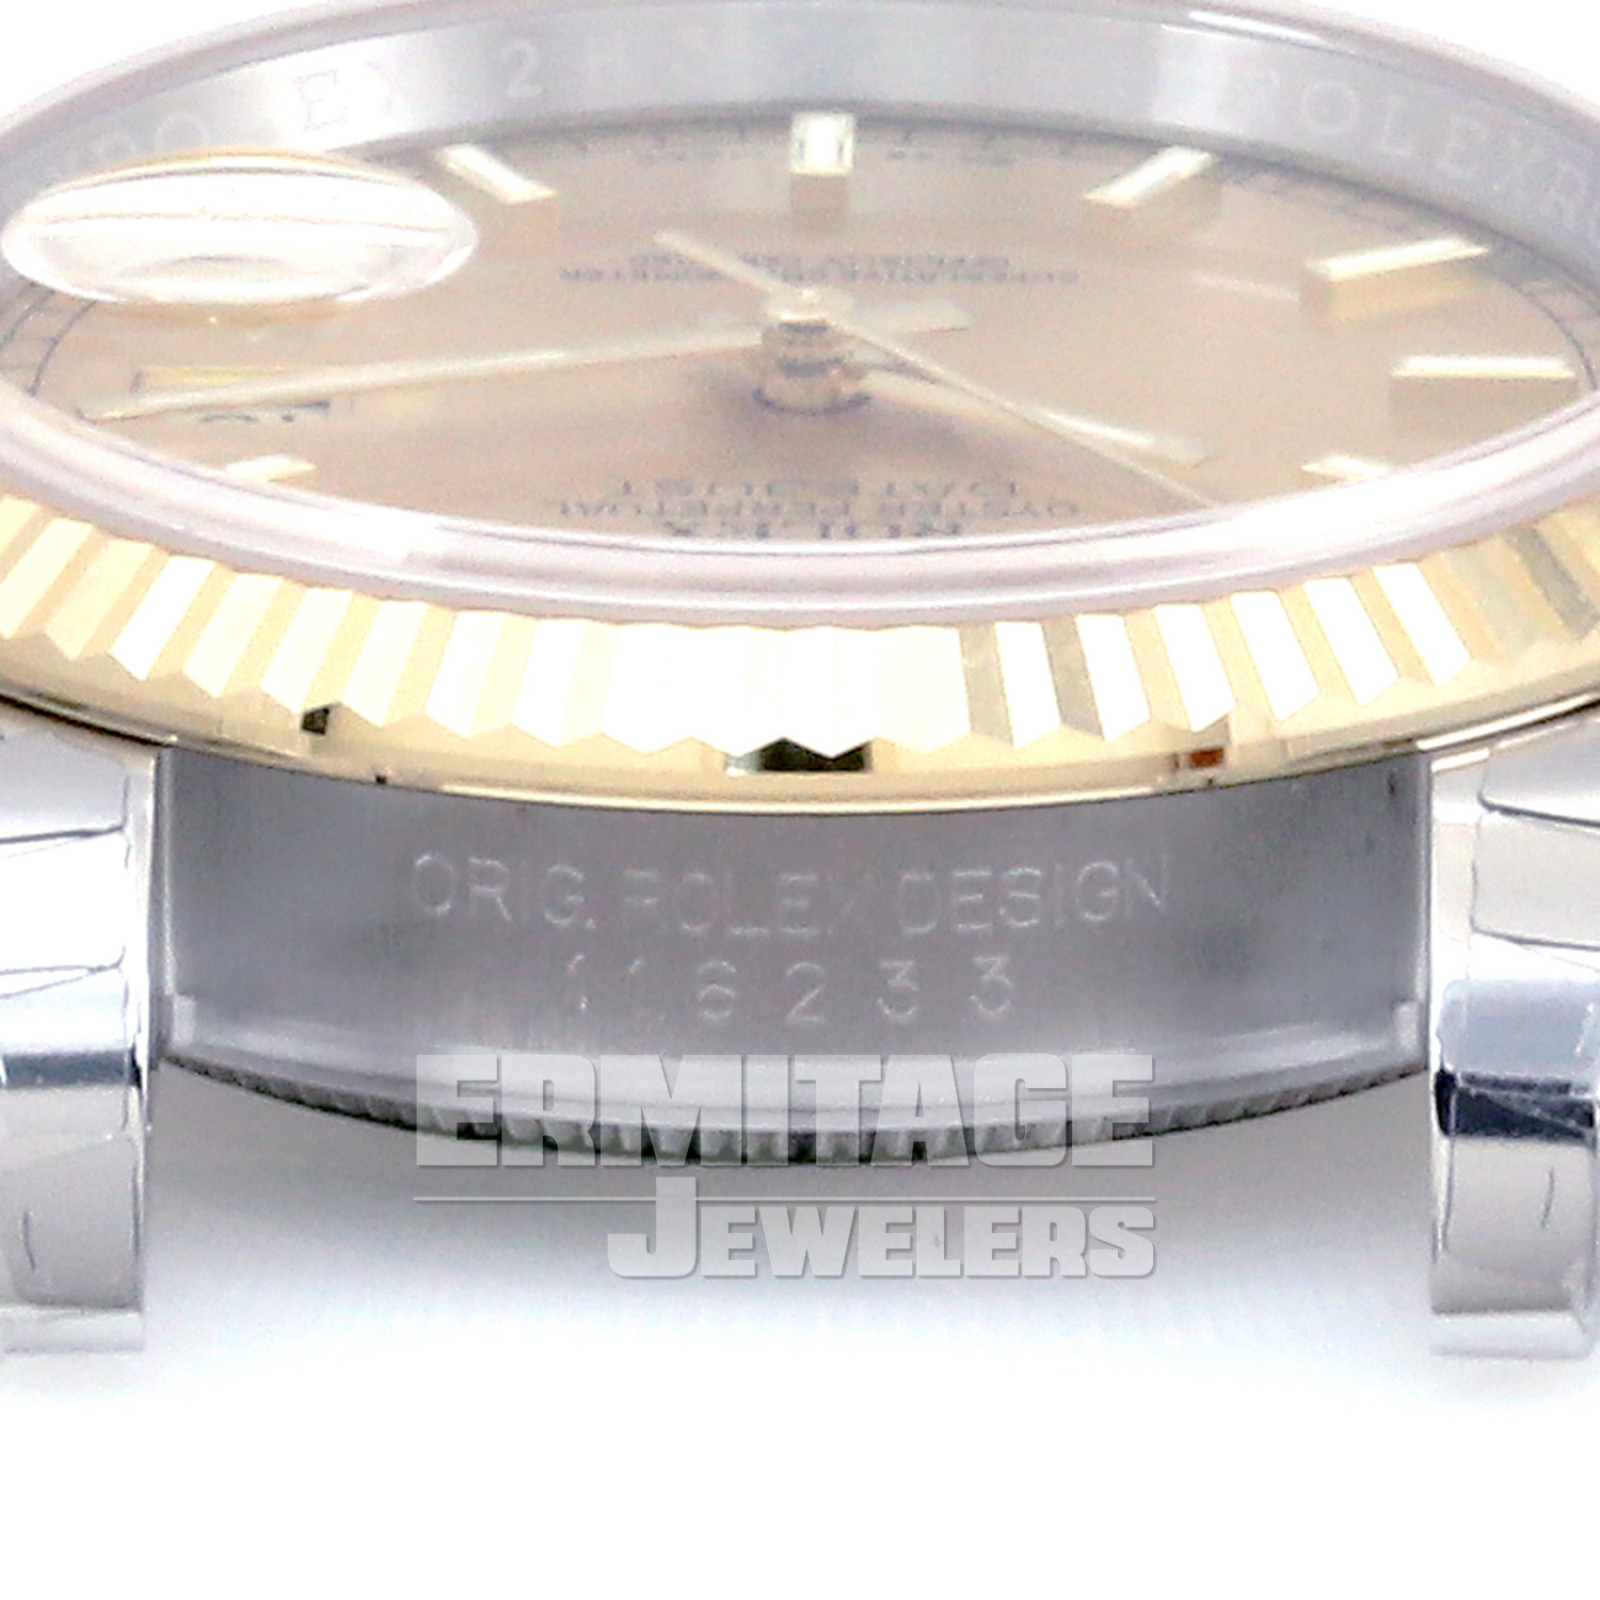 Classic Rolex Datejust 116233 with Champagne Dial